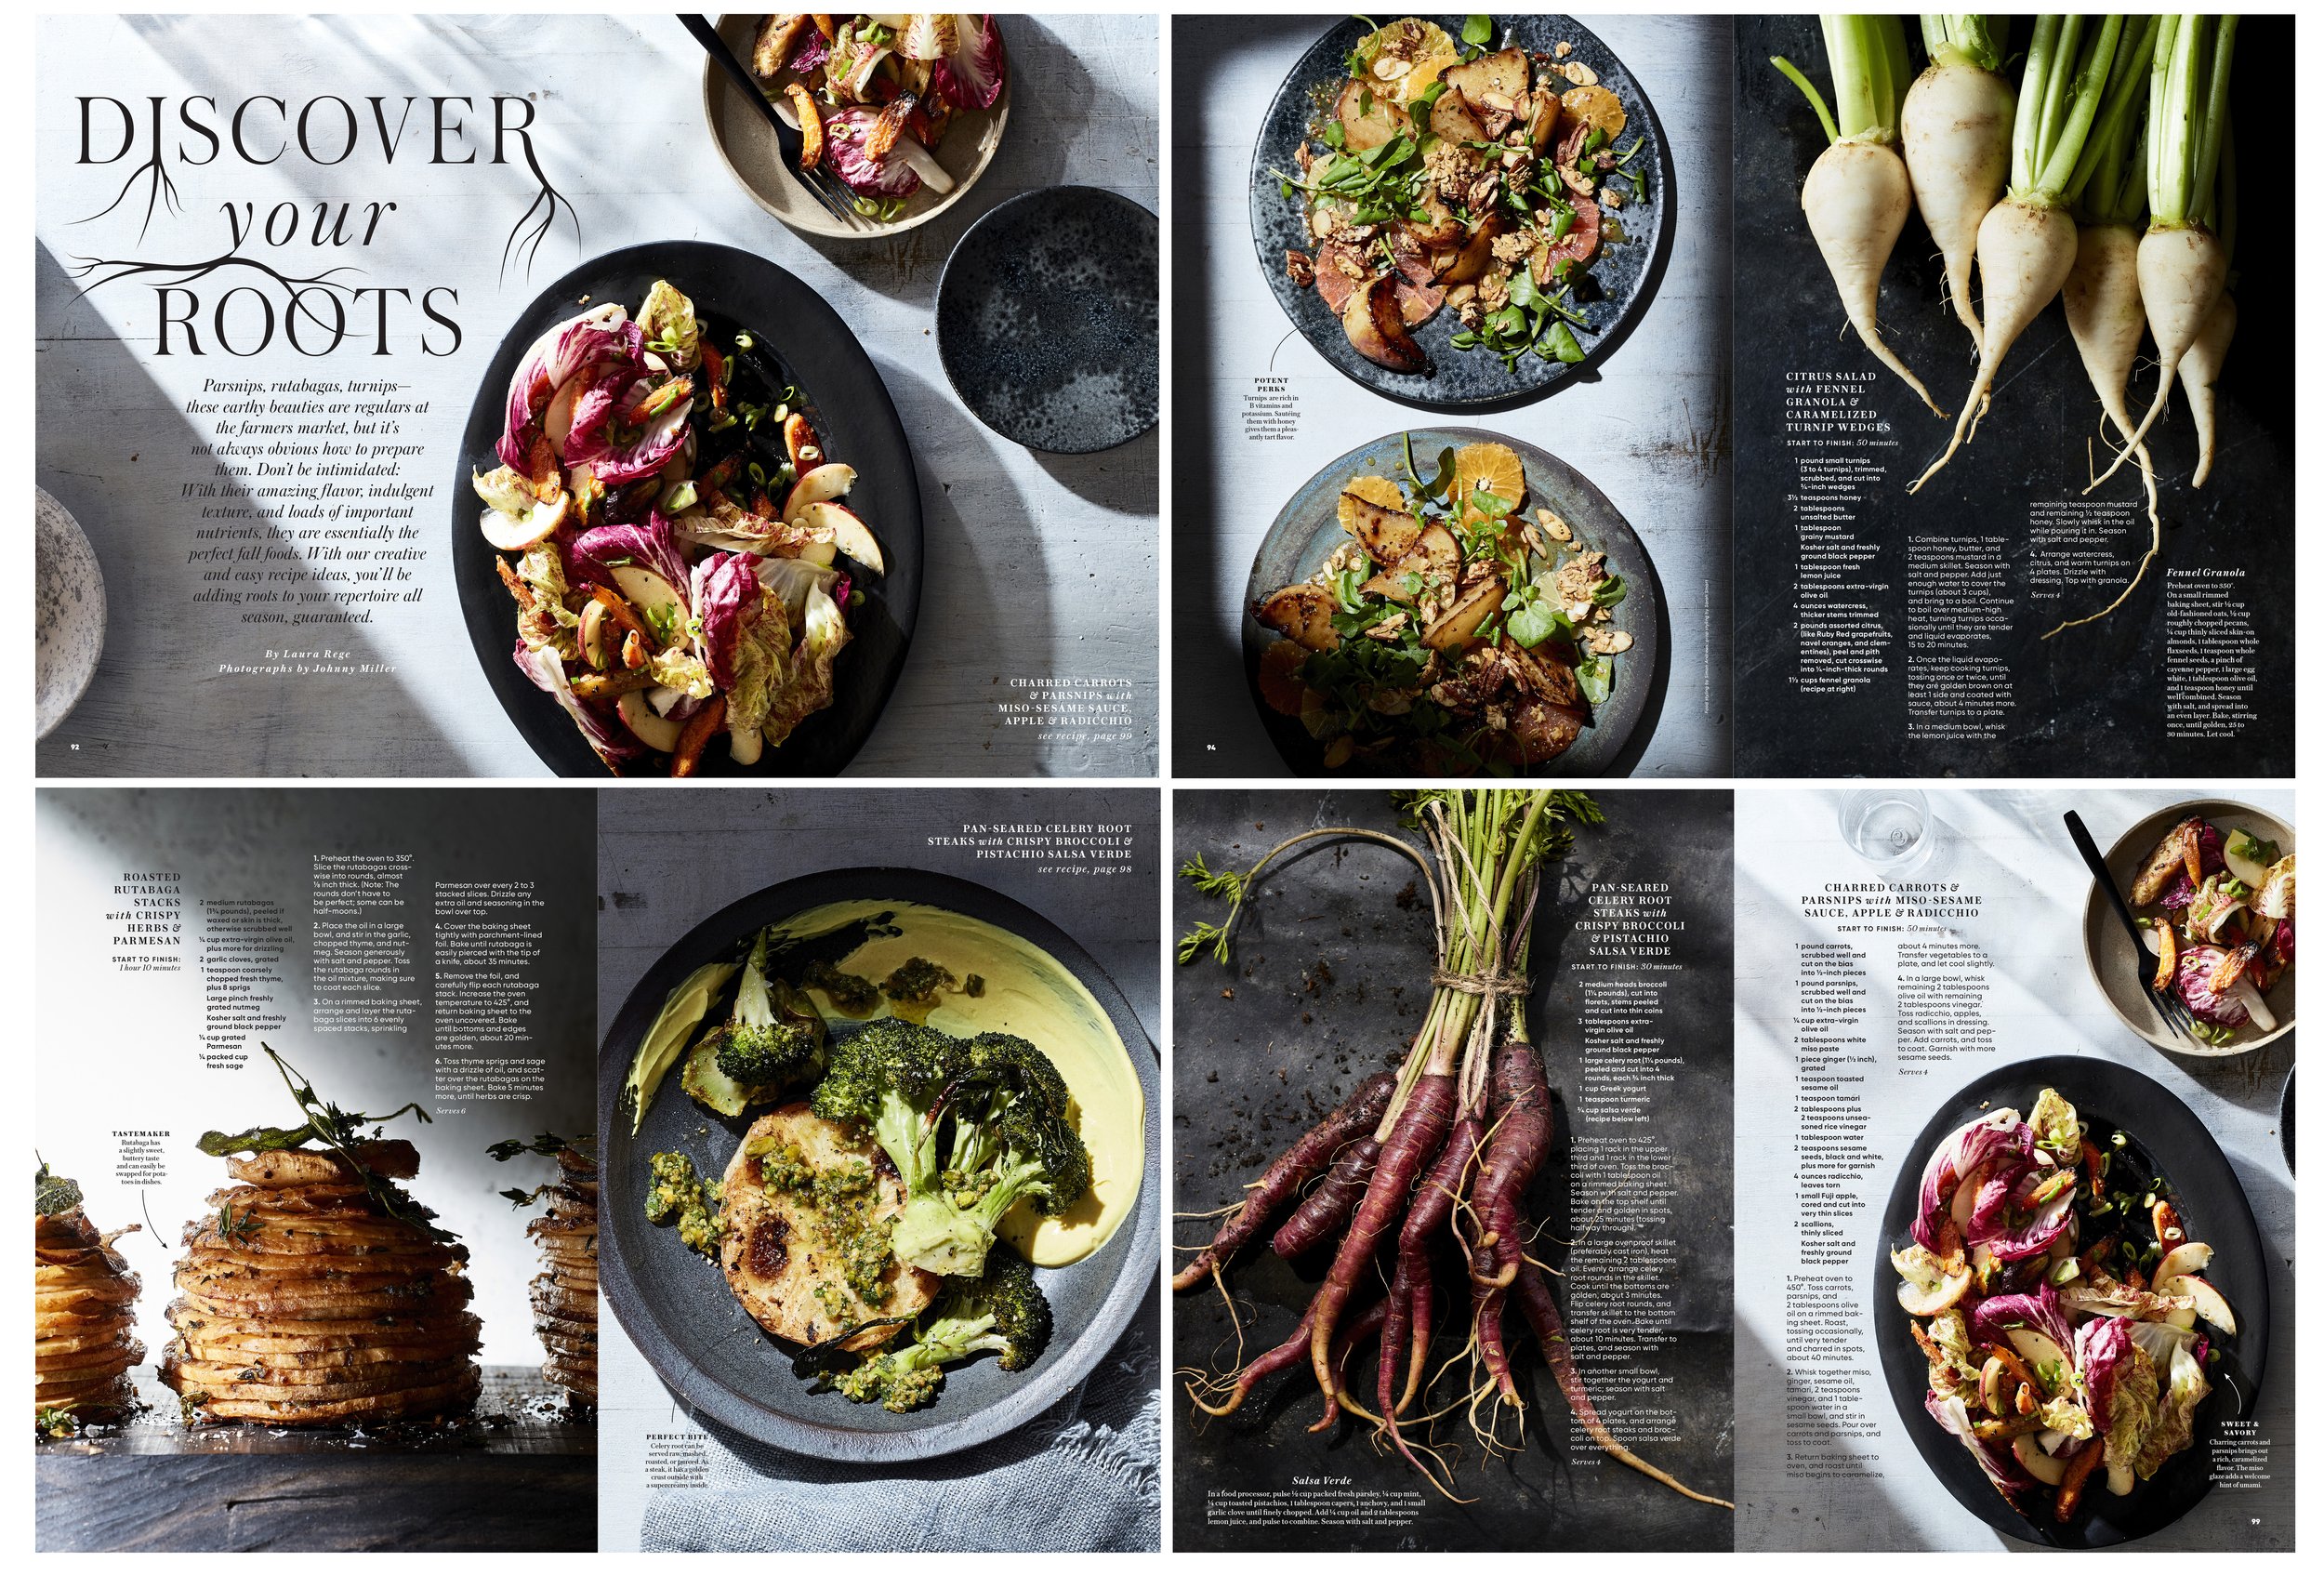 Final Photos and Layout: Food Feature- Discover Your Roots